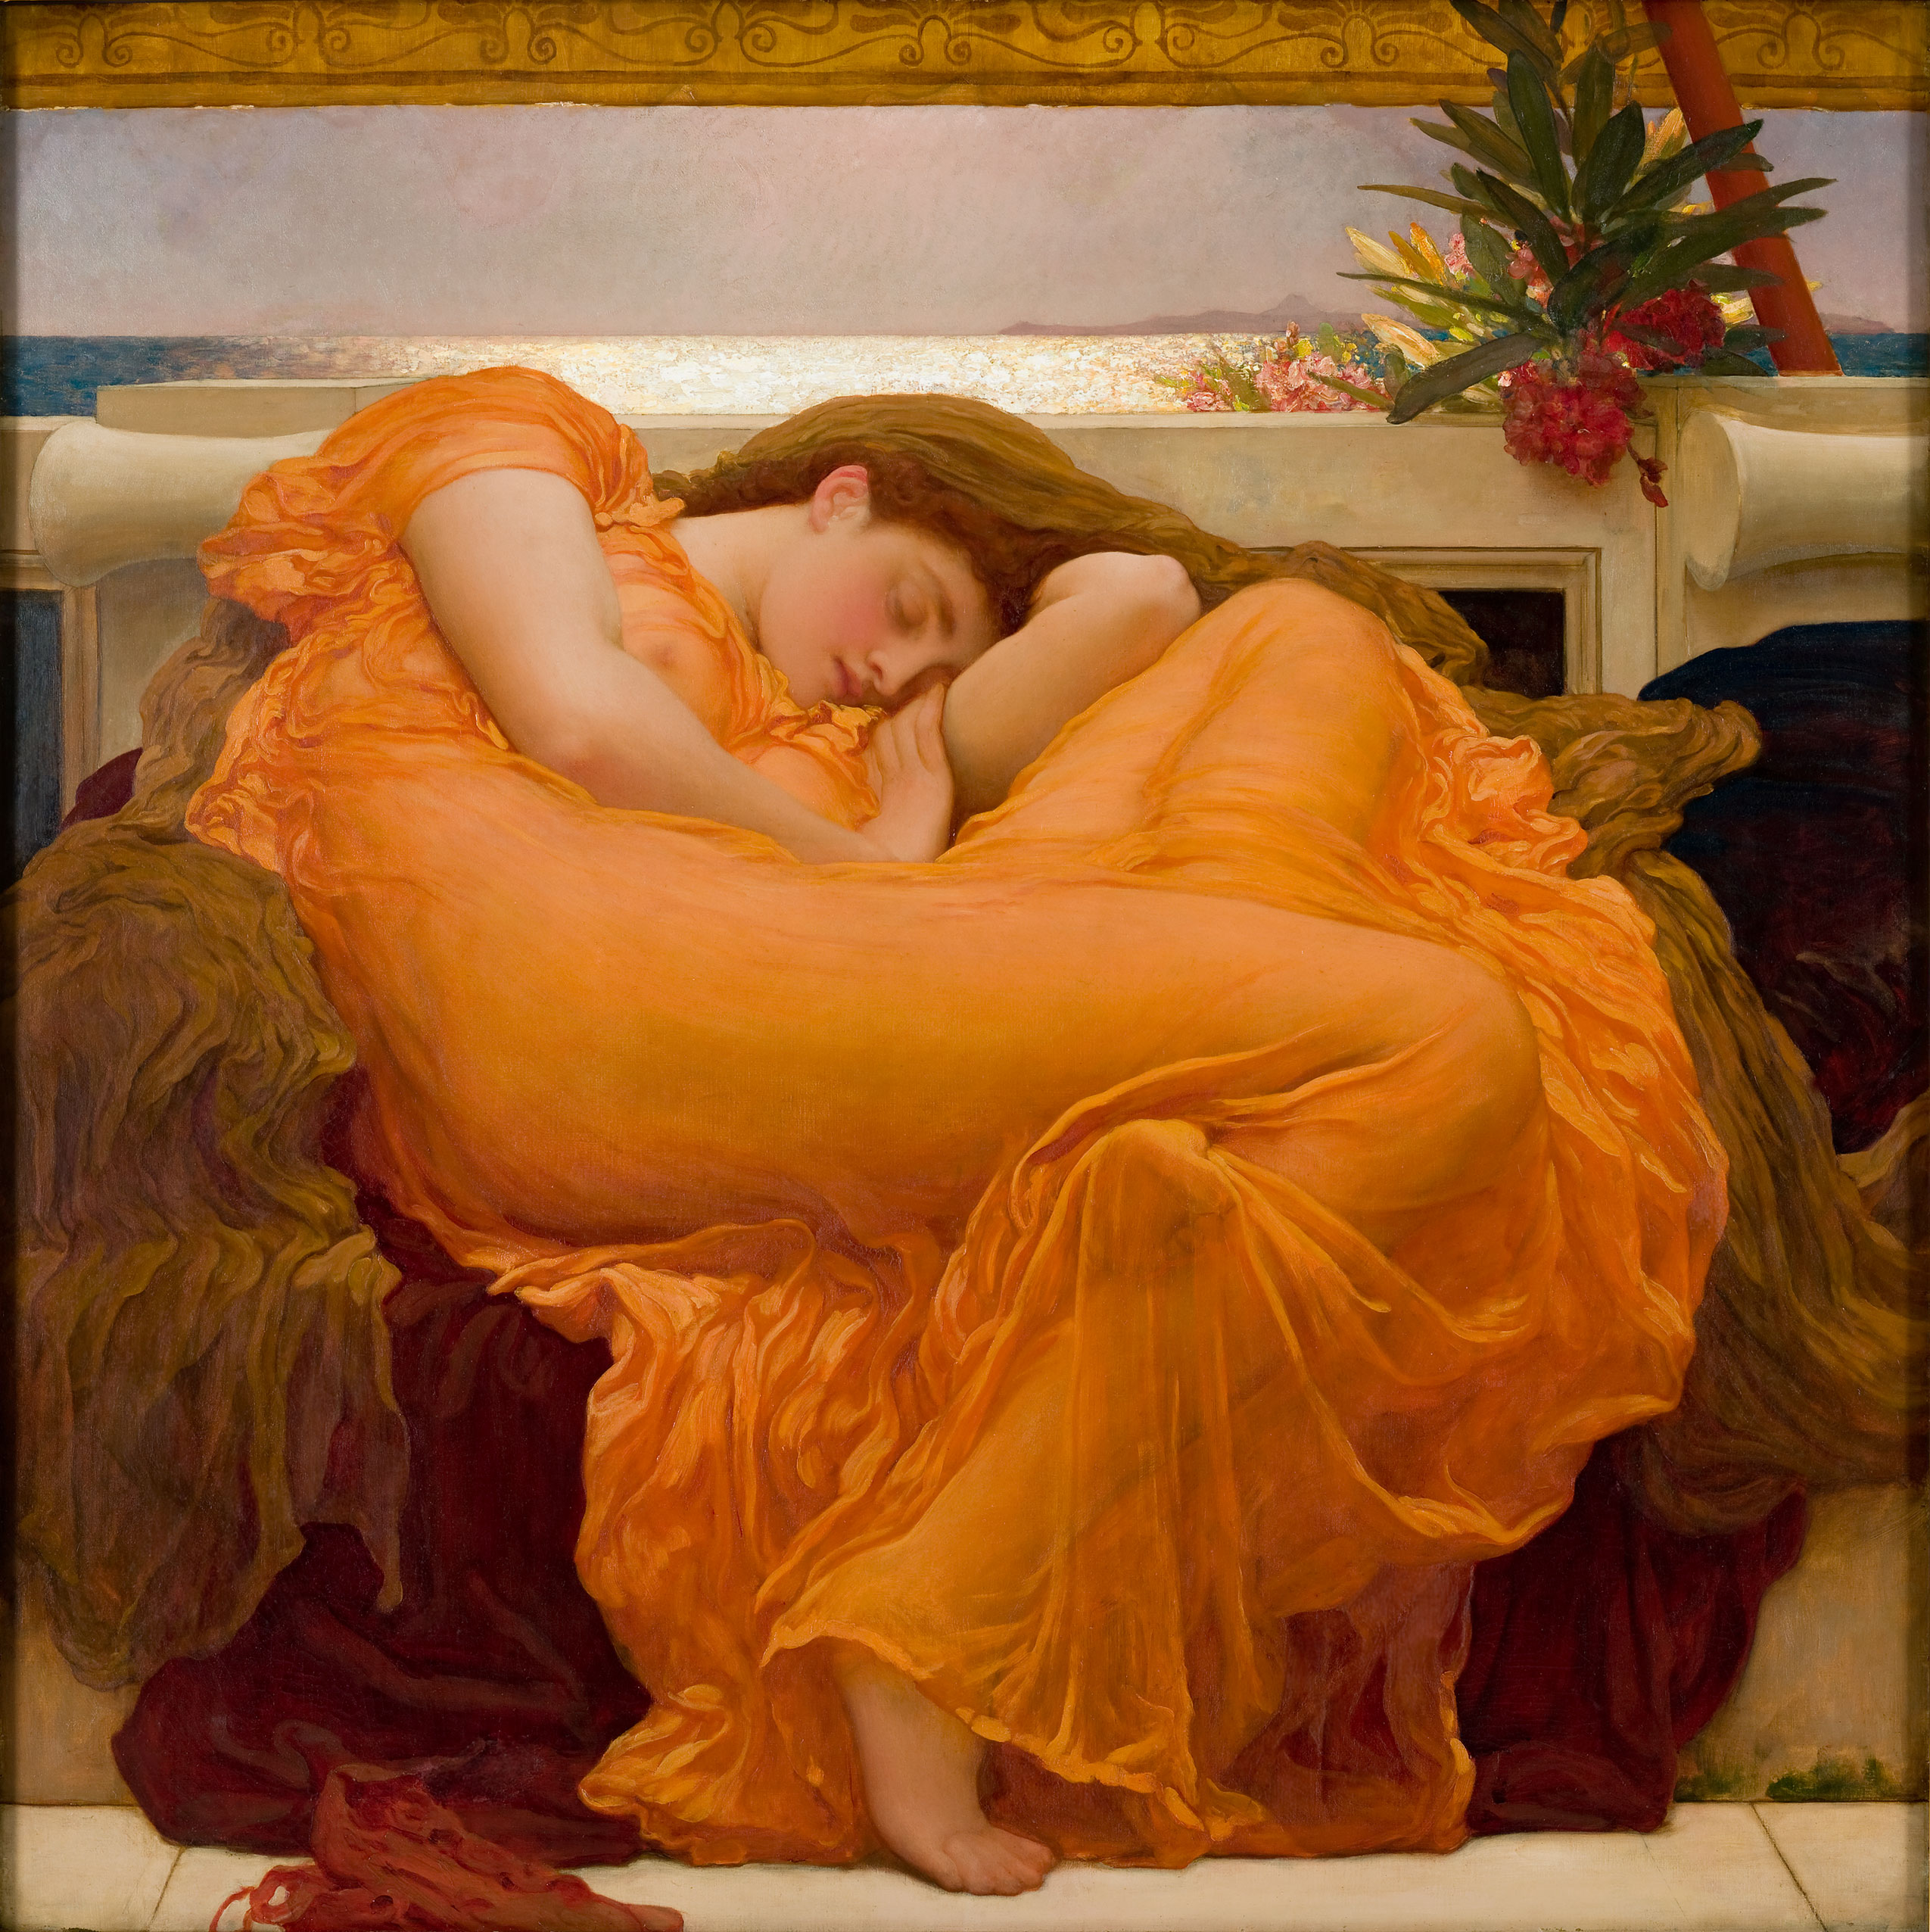 Flaming June by Frederic Leighton - 1895 - 1,20 m x 1,20 m Museo de Arte de Ponce